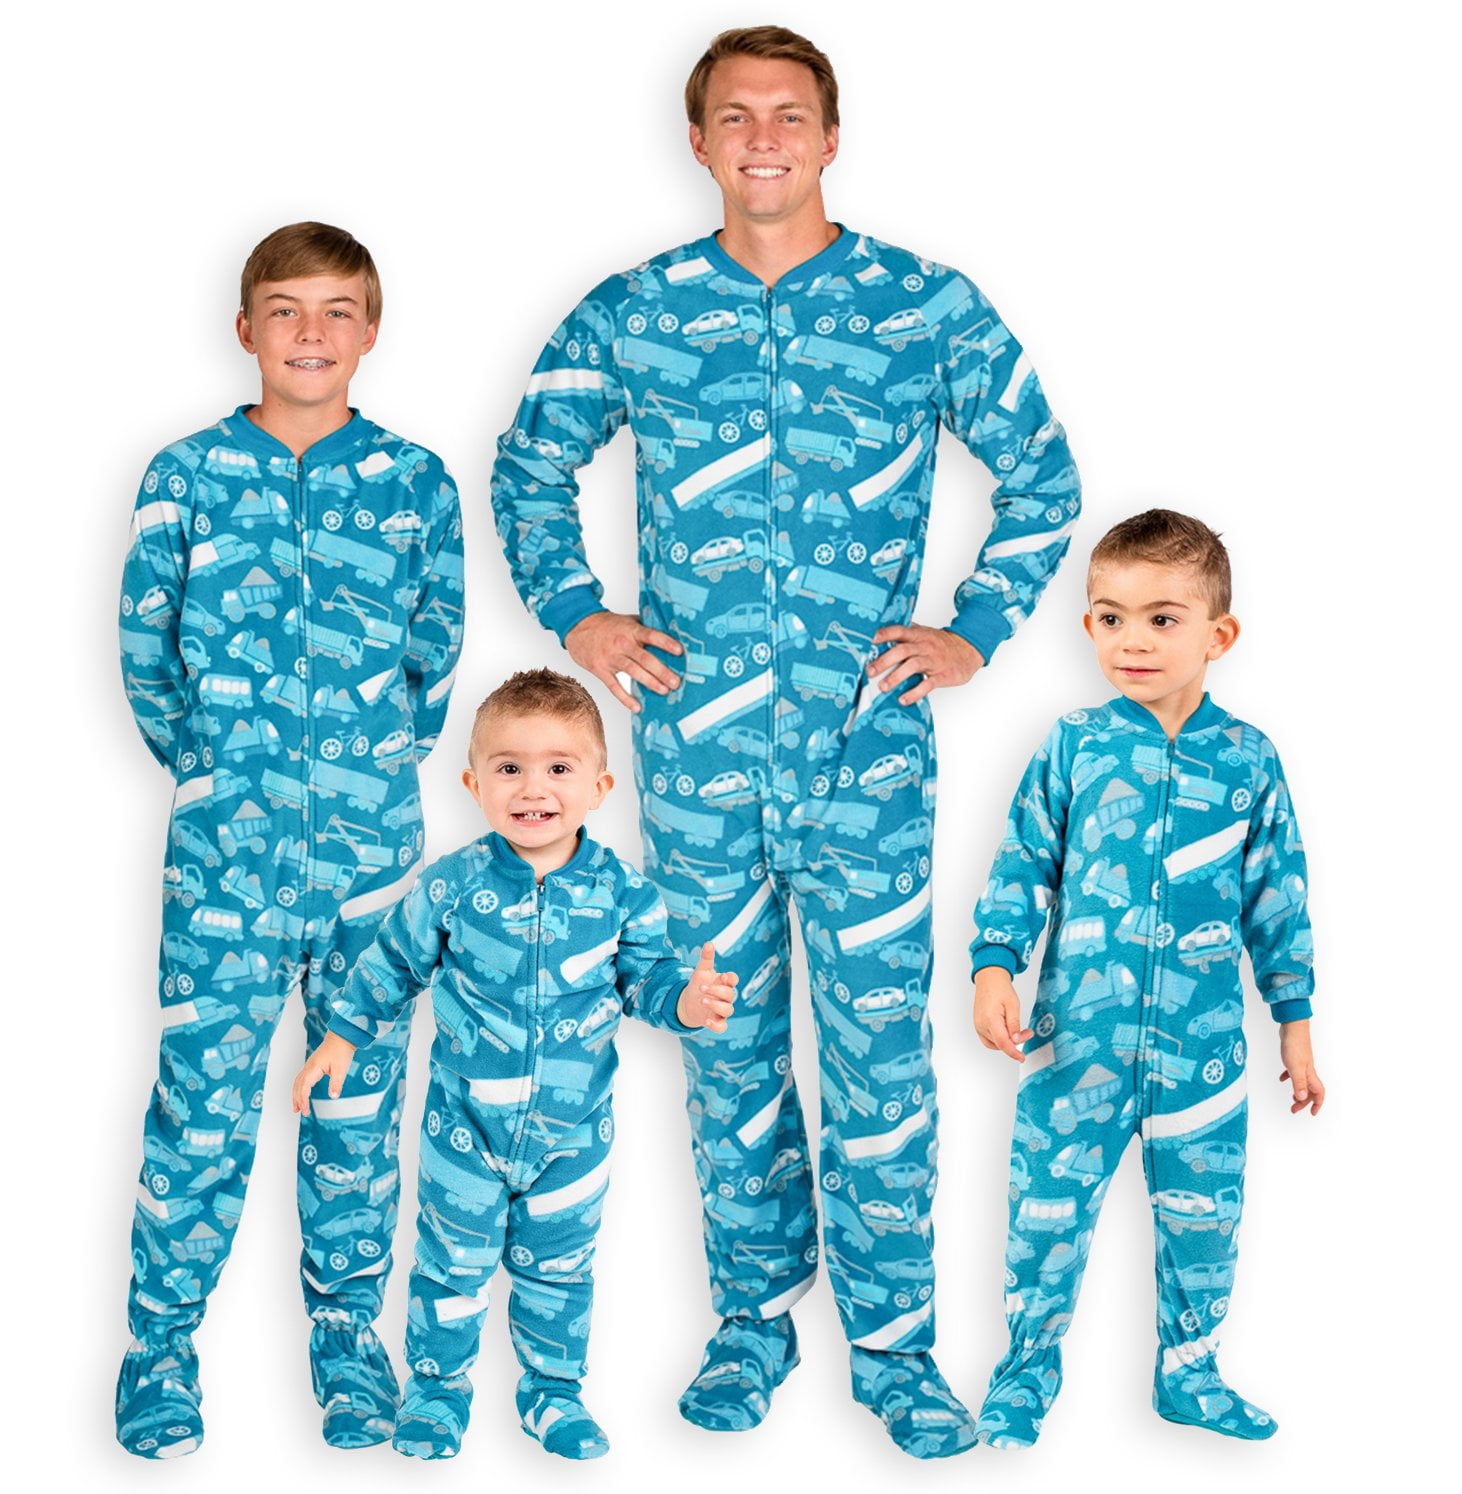 Women and Pets Girls Footed Pajamas Men Family Matching Kisses Hoodie Onesies for Boys